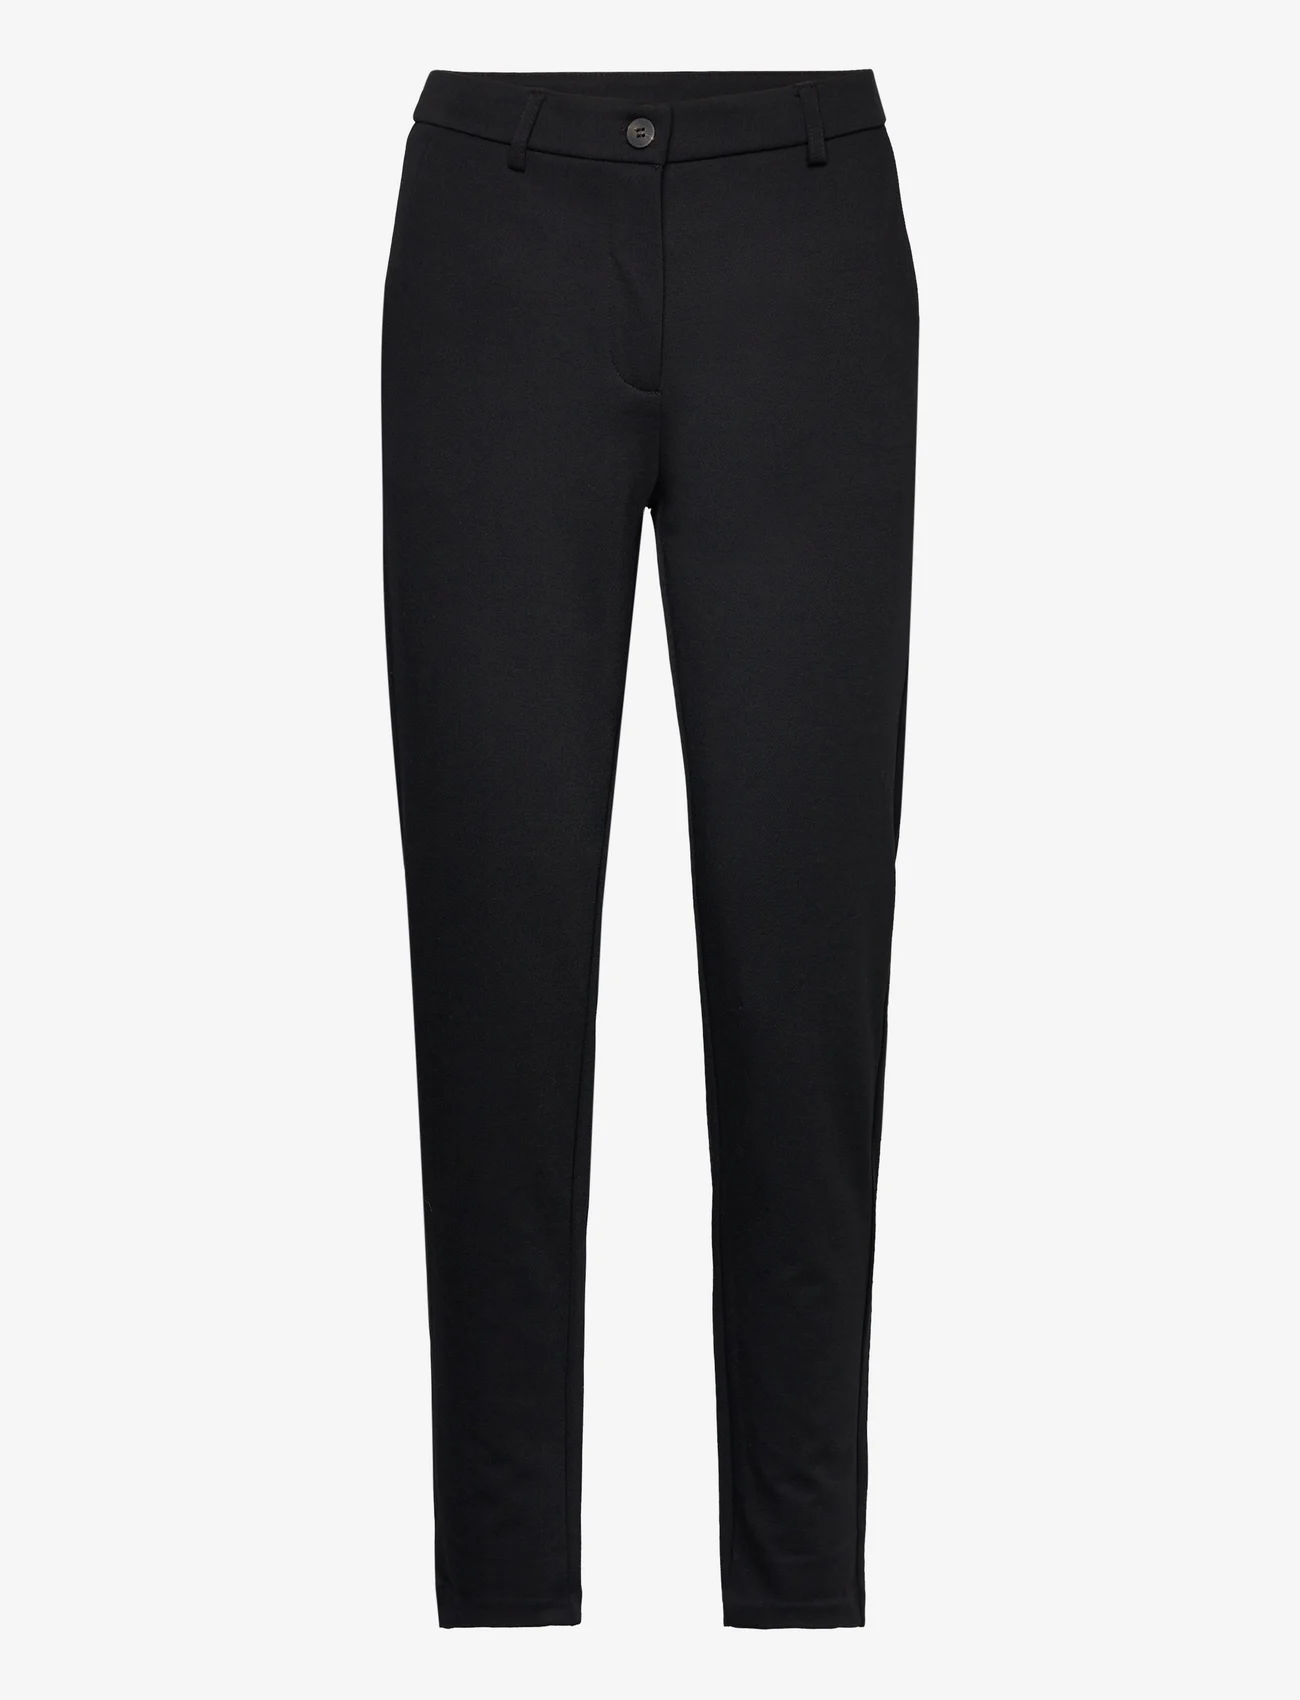 FREE/QUENT - FQNANNI-PANT - kostymbyxor - black - 0